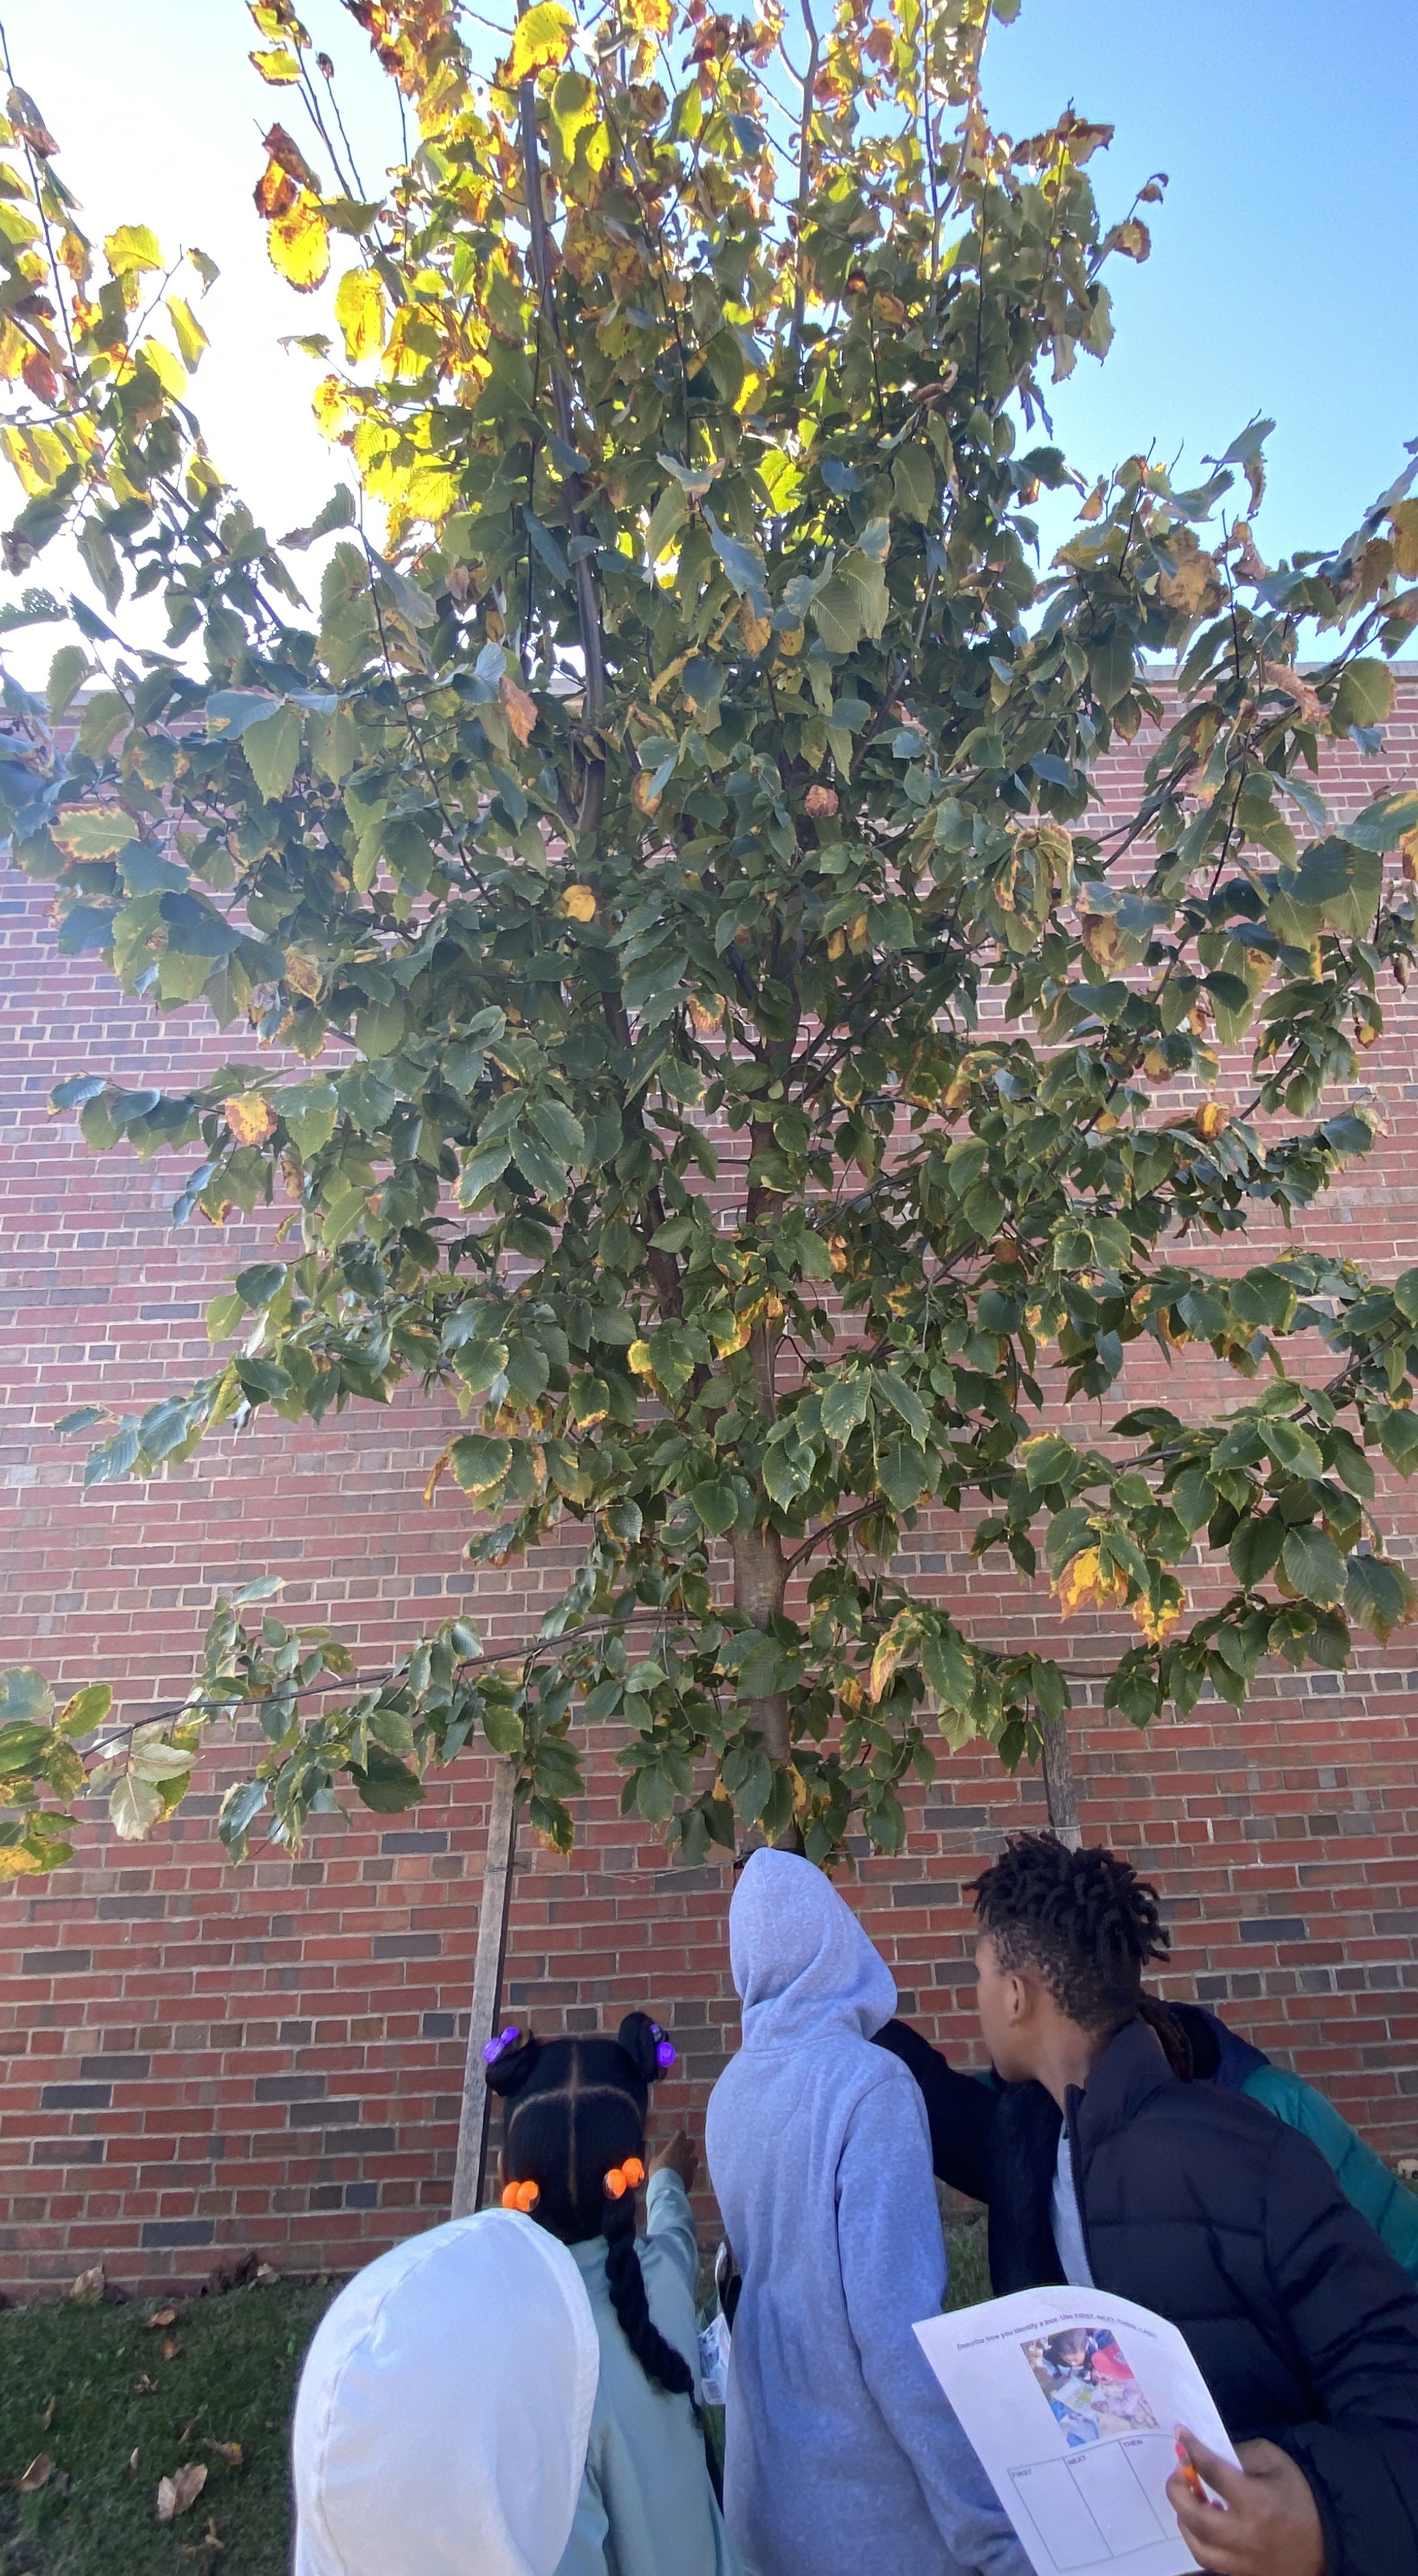 Students identify trees outside their school